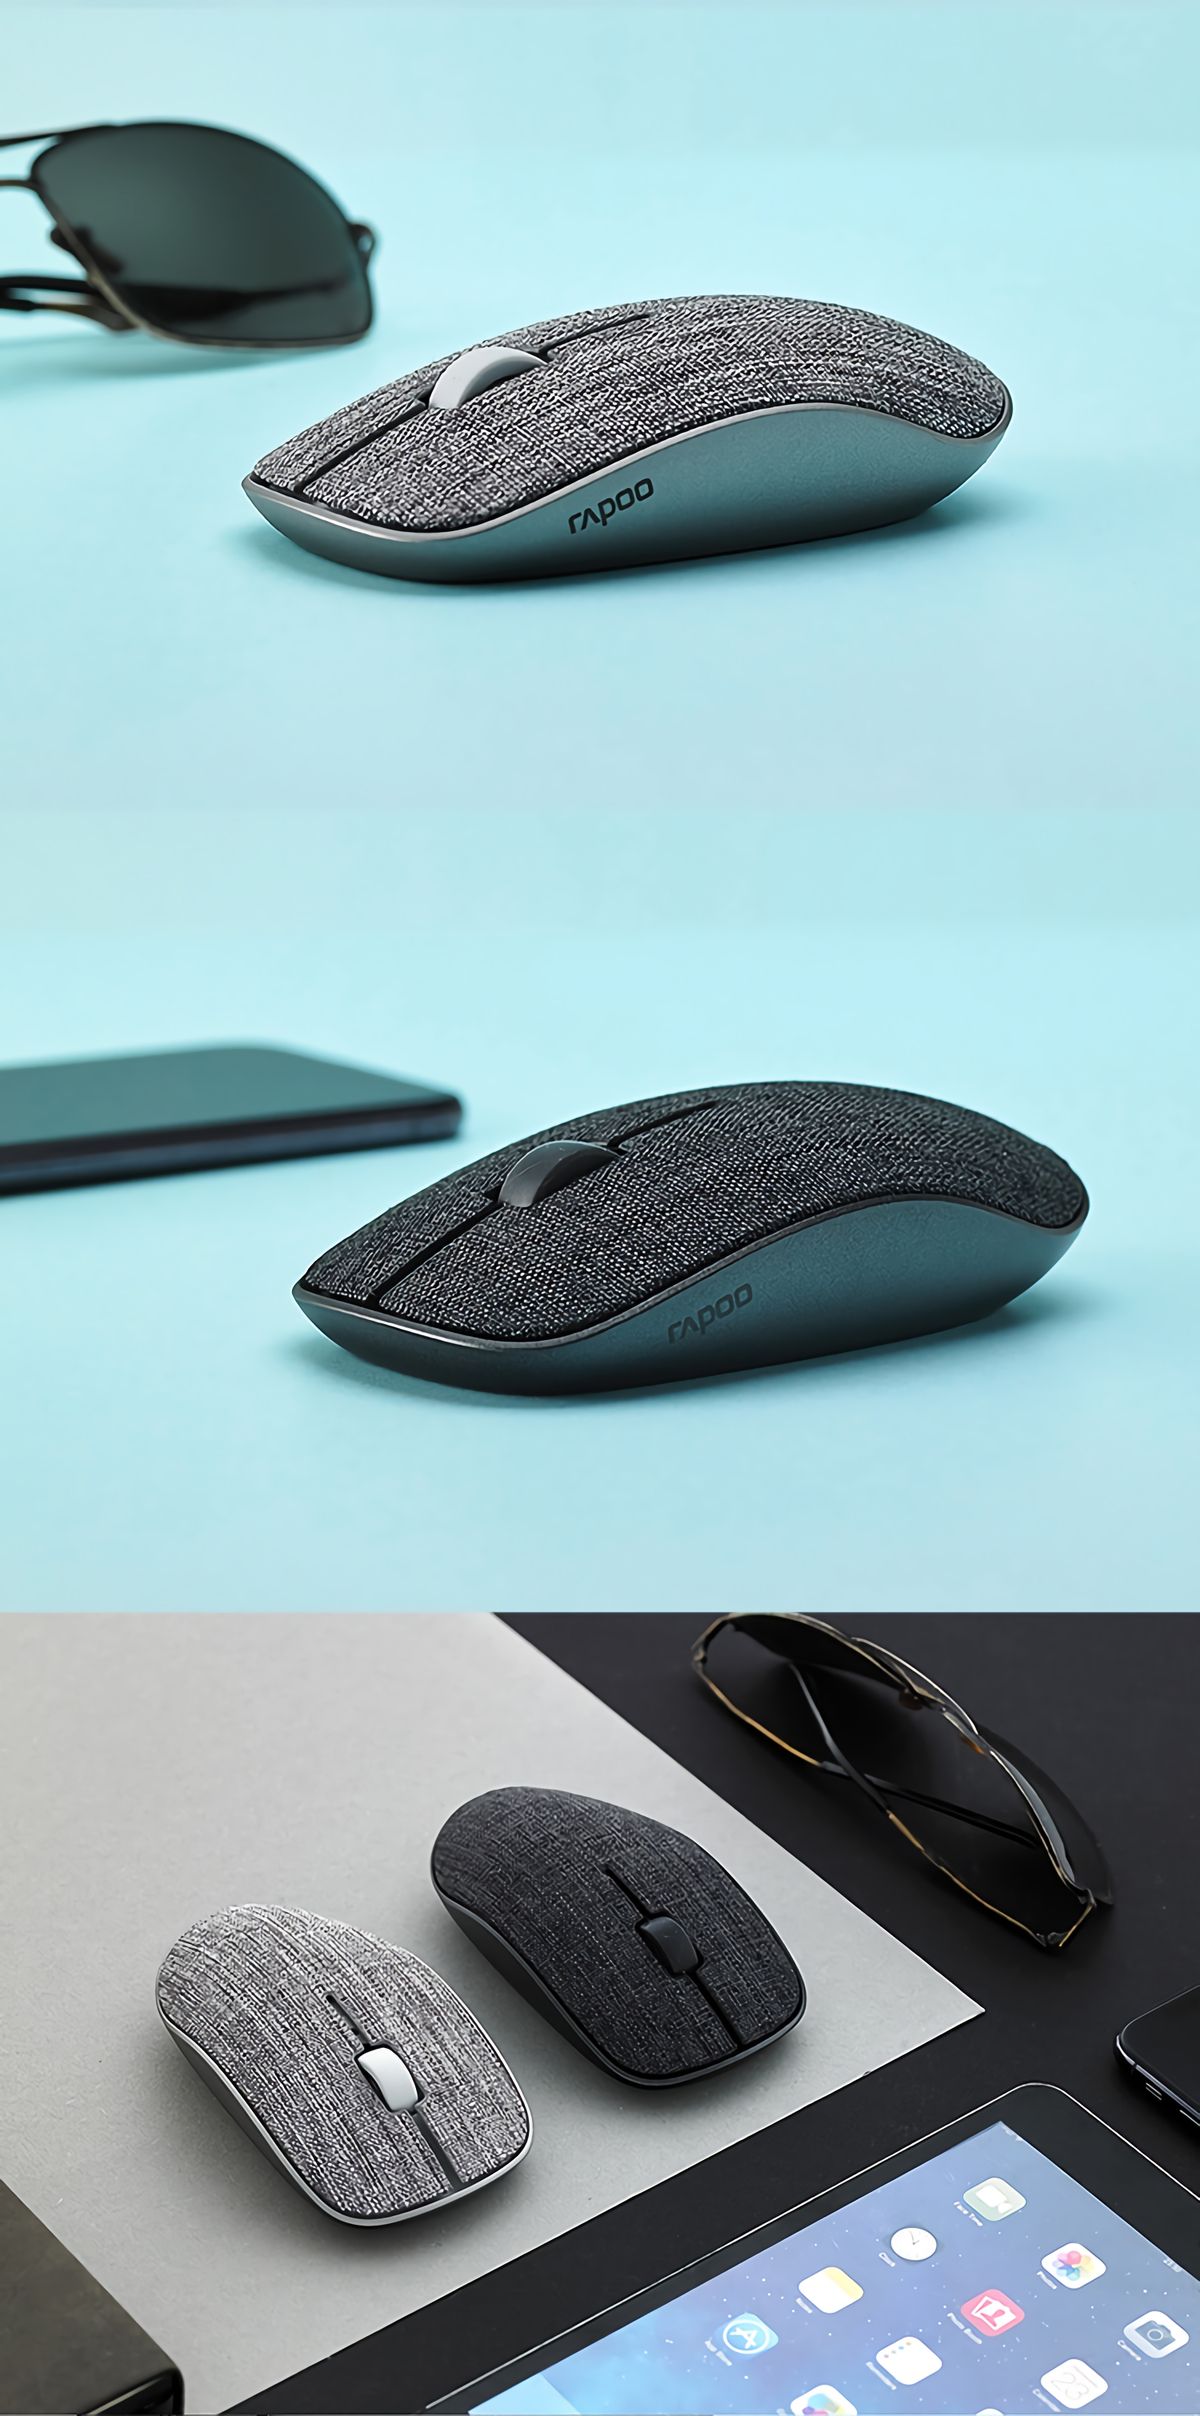 Rapoo-M200G-Plus-Wireless-Fabric-Mouse-bluetooth-304024Ghz-1300DPI-Home-Office-Mute-Mouse-Portable-N-1765257